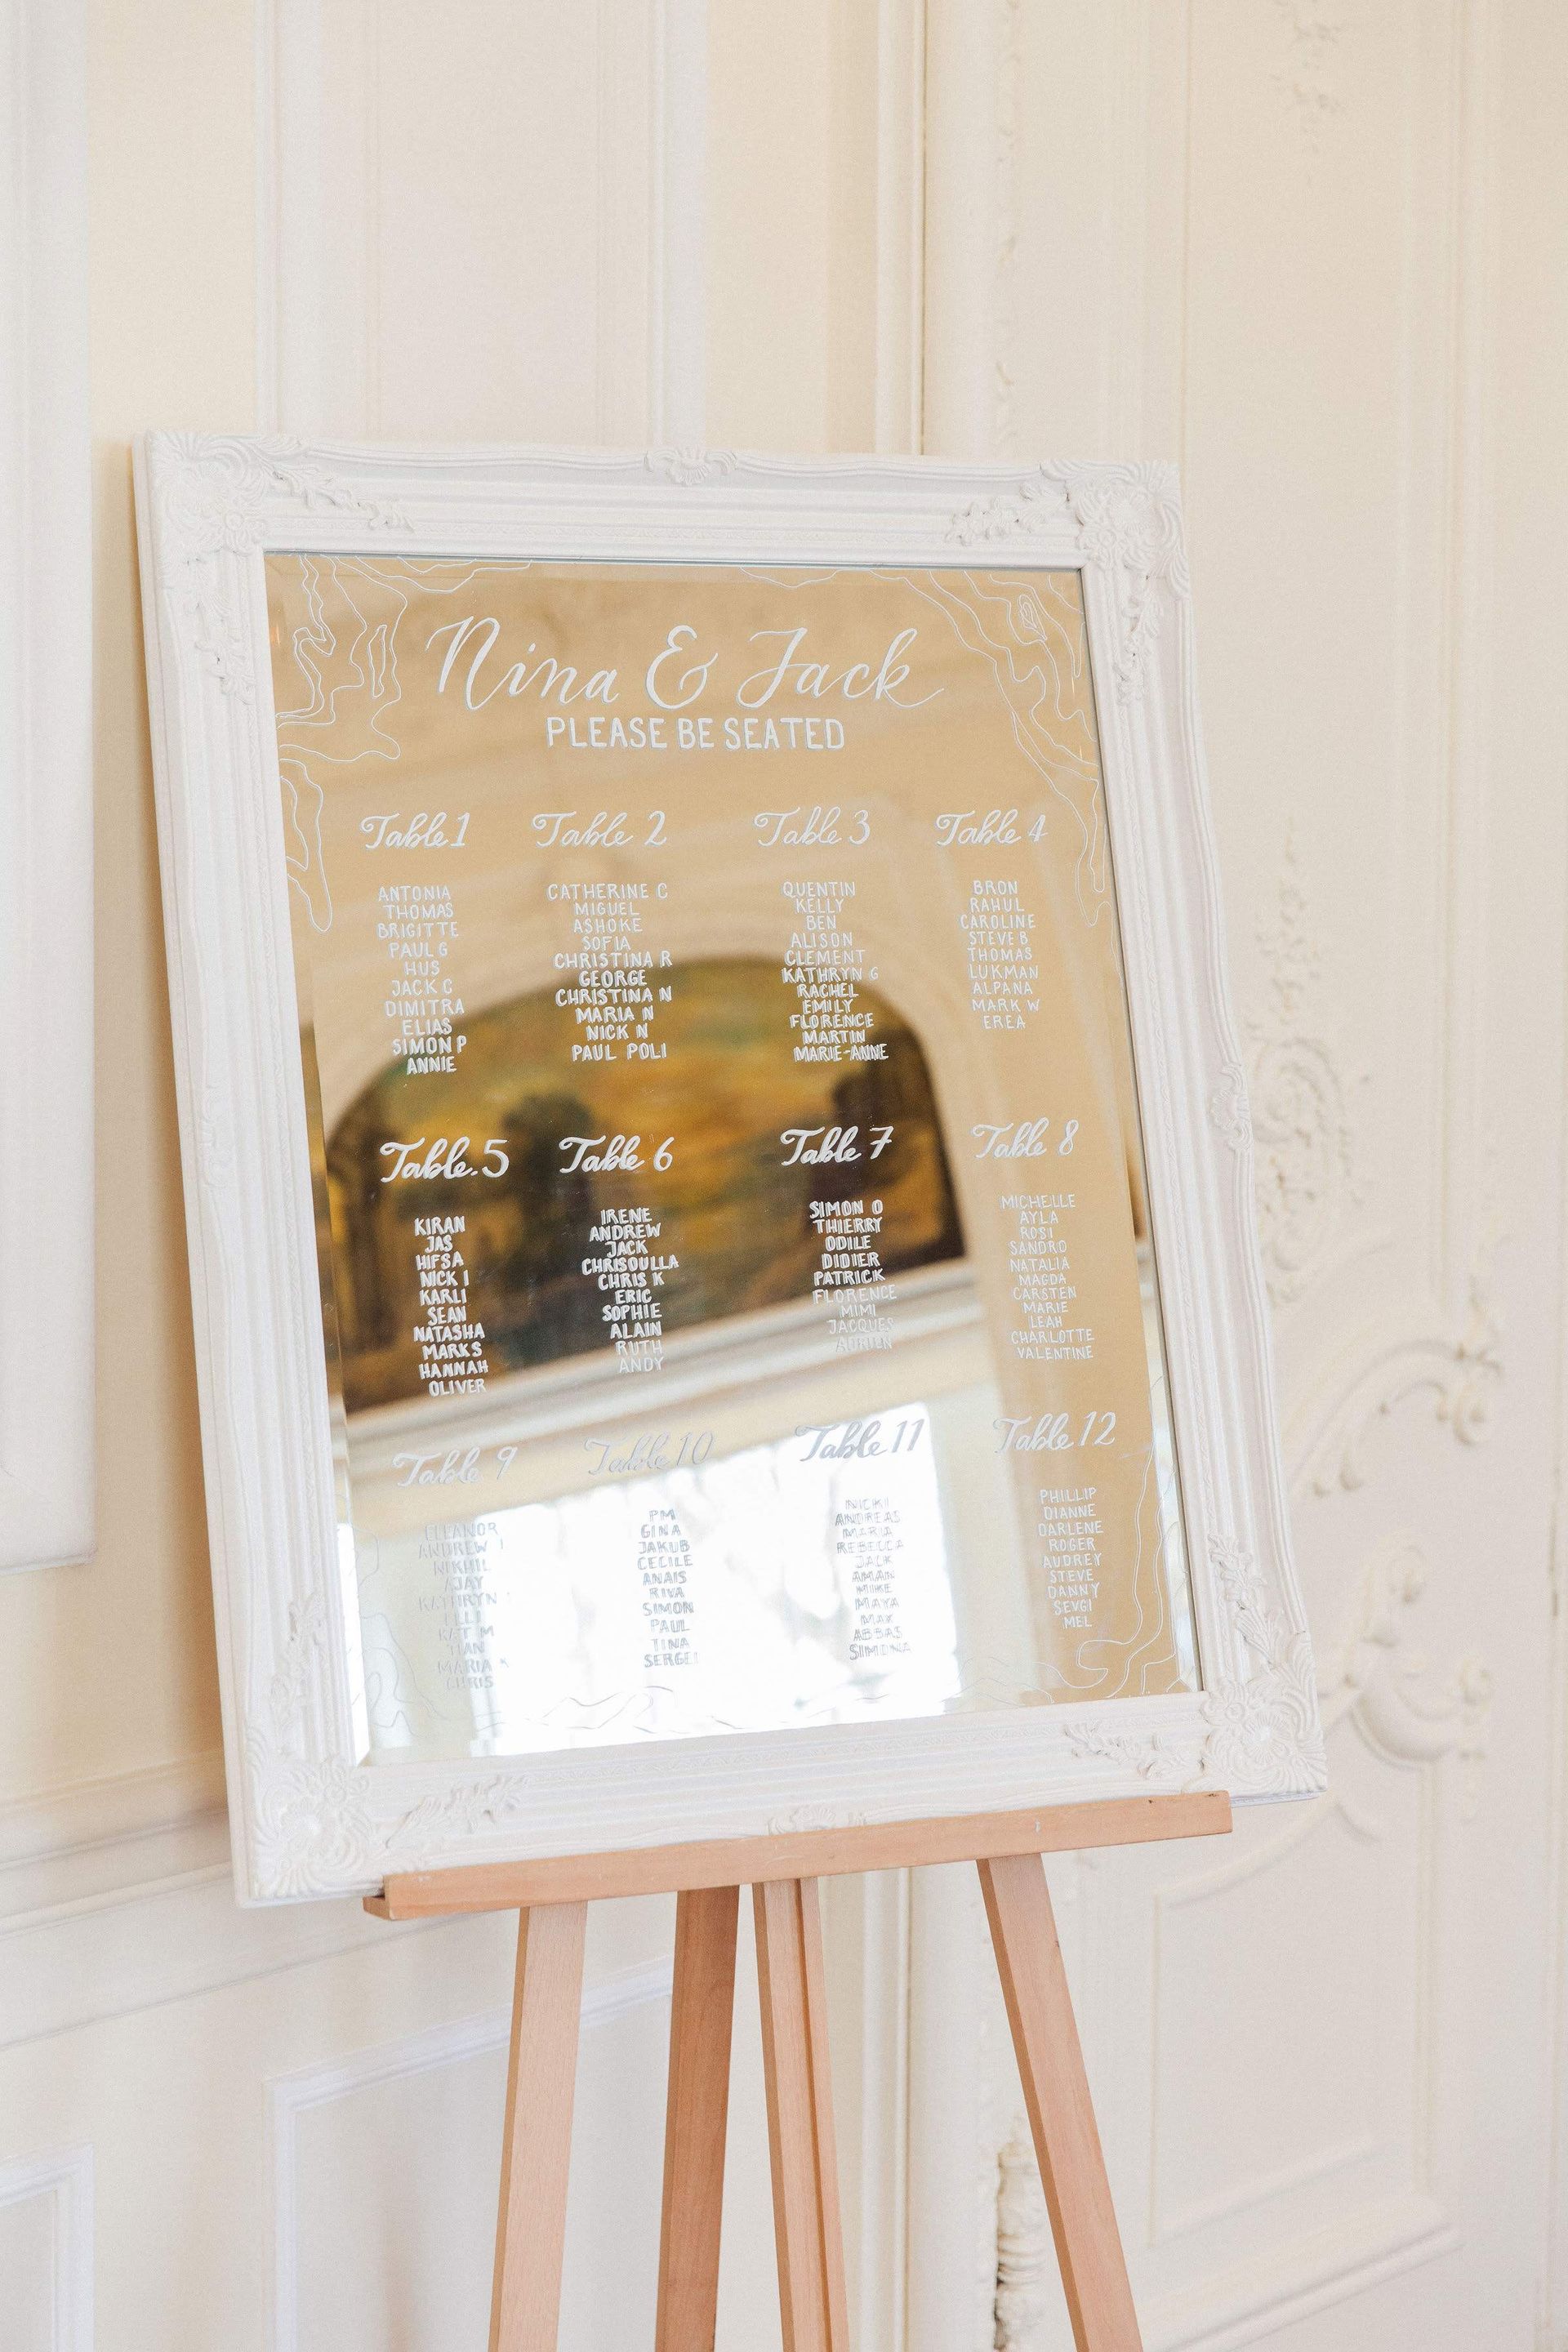 Mirrored seating plan in a white frame on a wooden easel